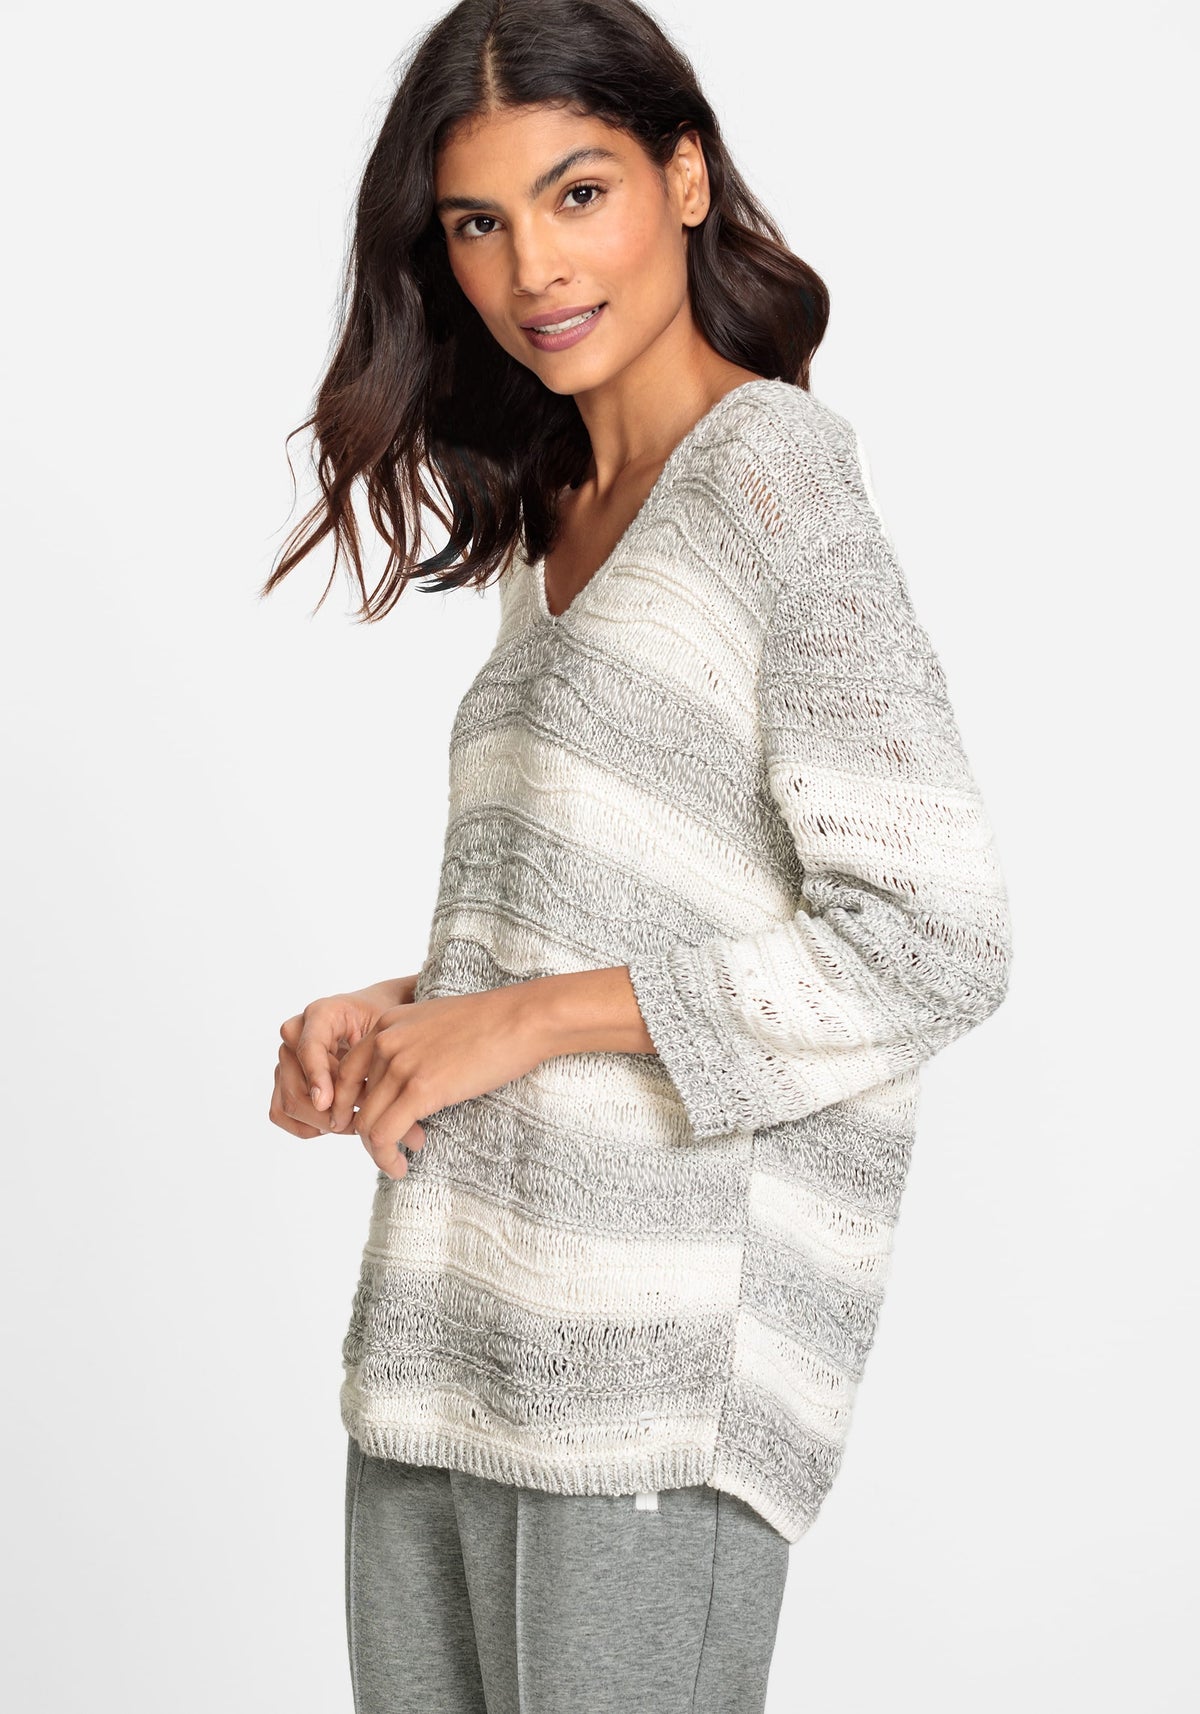 Cotton Blend 3/4 Sleeve Open Knit Pullover